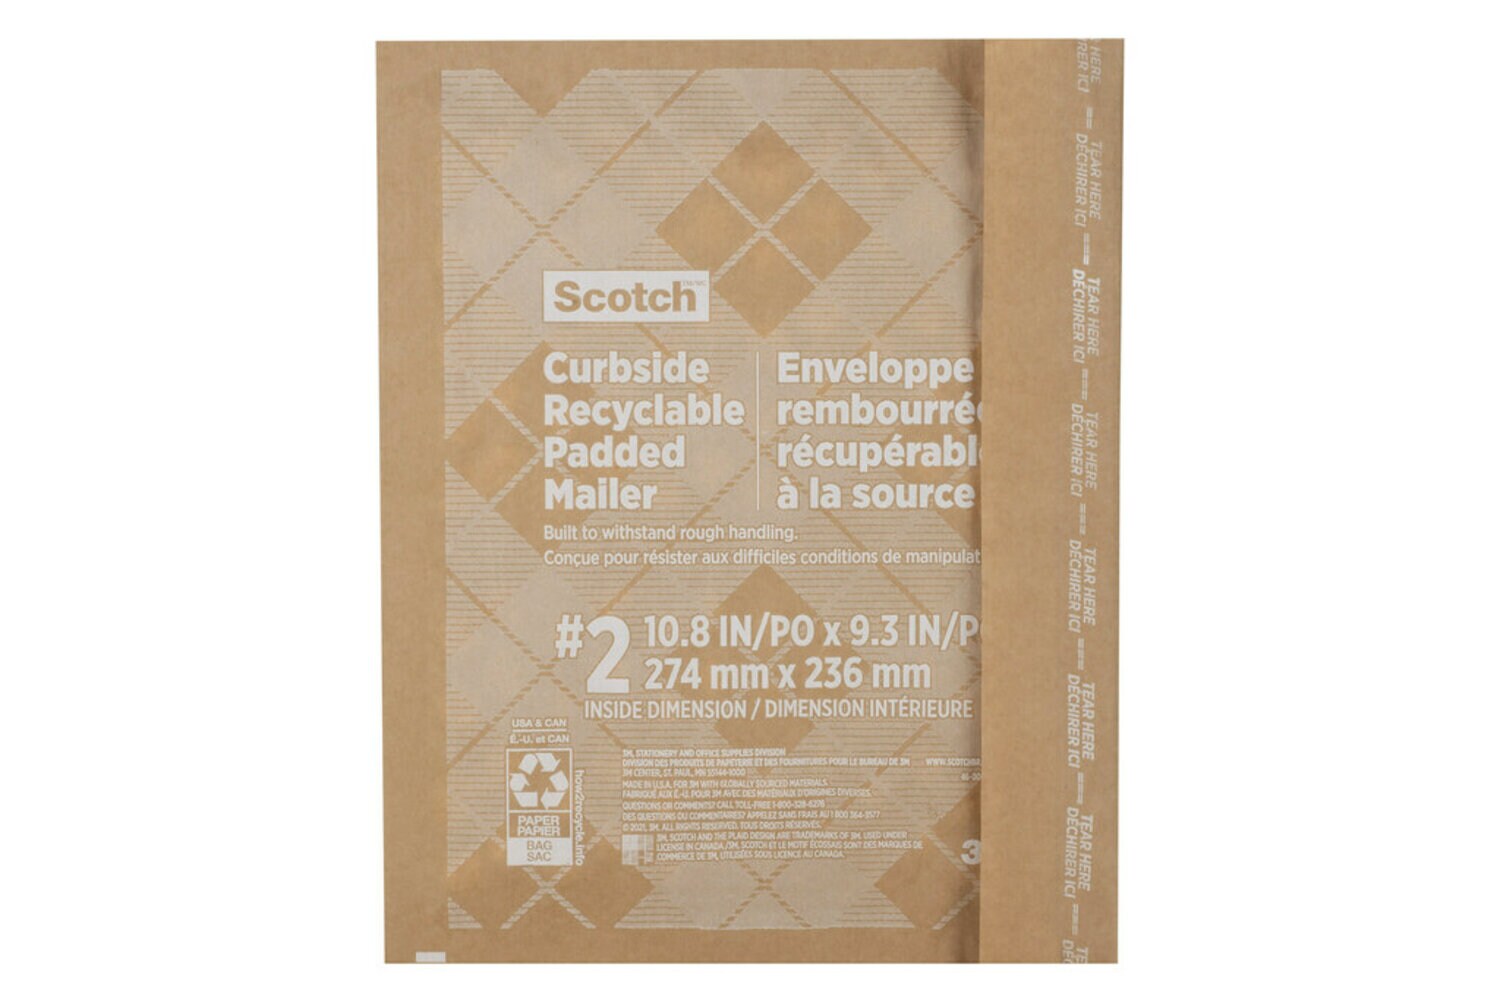 7100258635 - Scotch Curbside Recyclable Padded Mailer CR-2-1, 10.5 in x 9 in (266 mm x 228 mm), Size 2